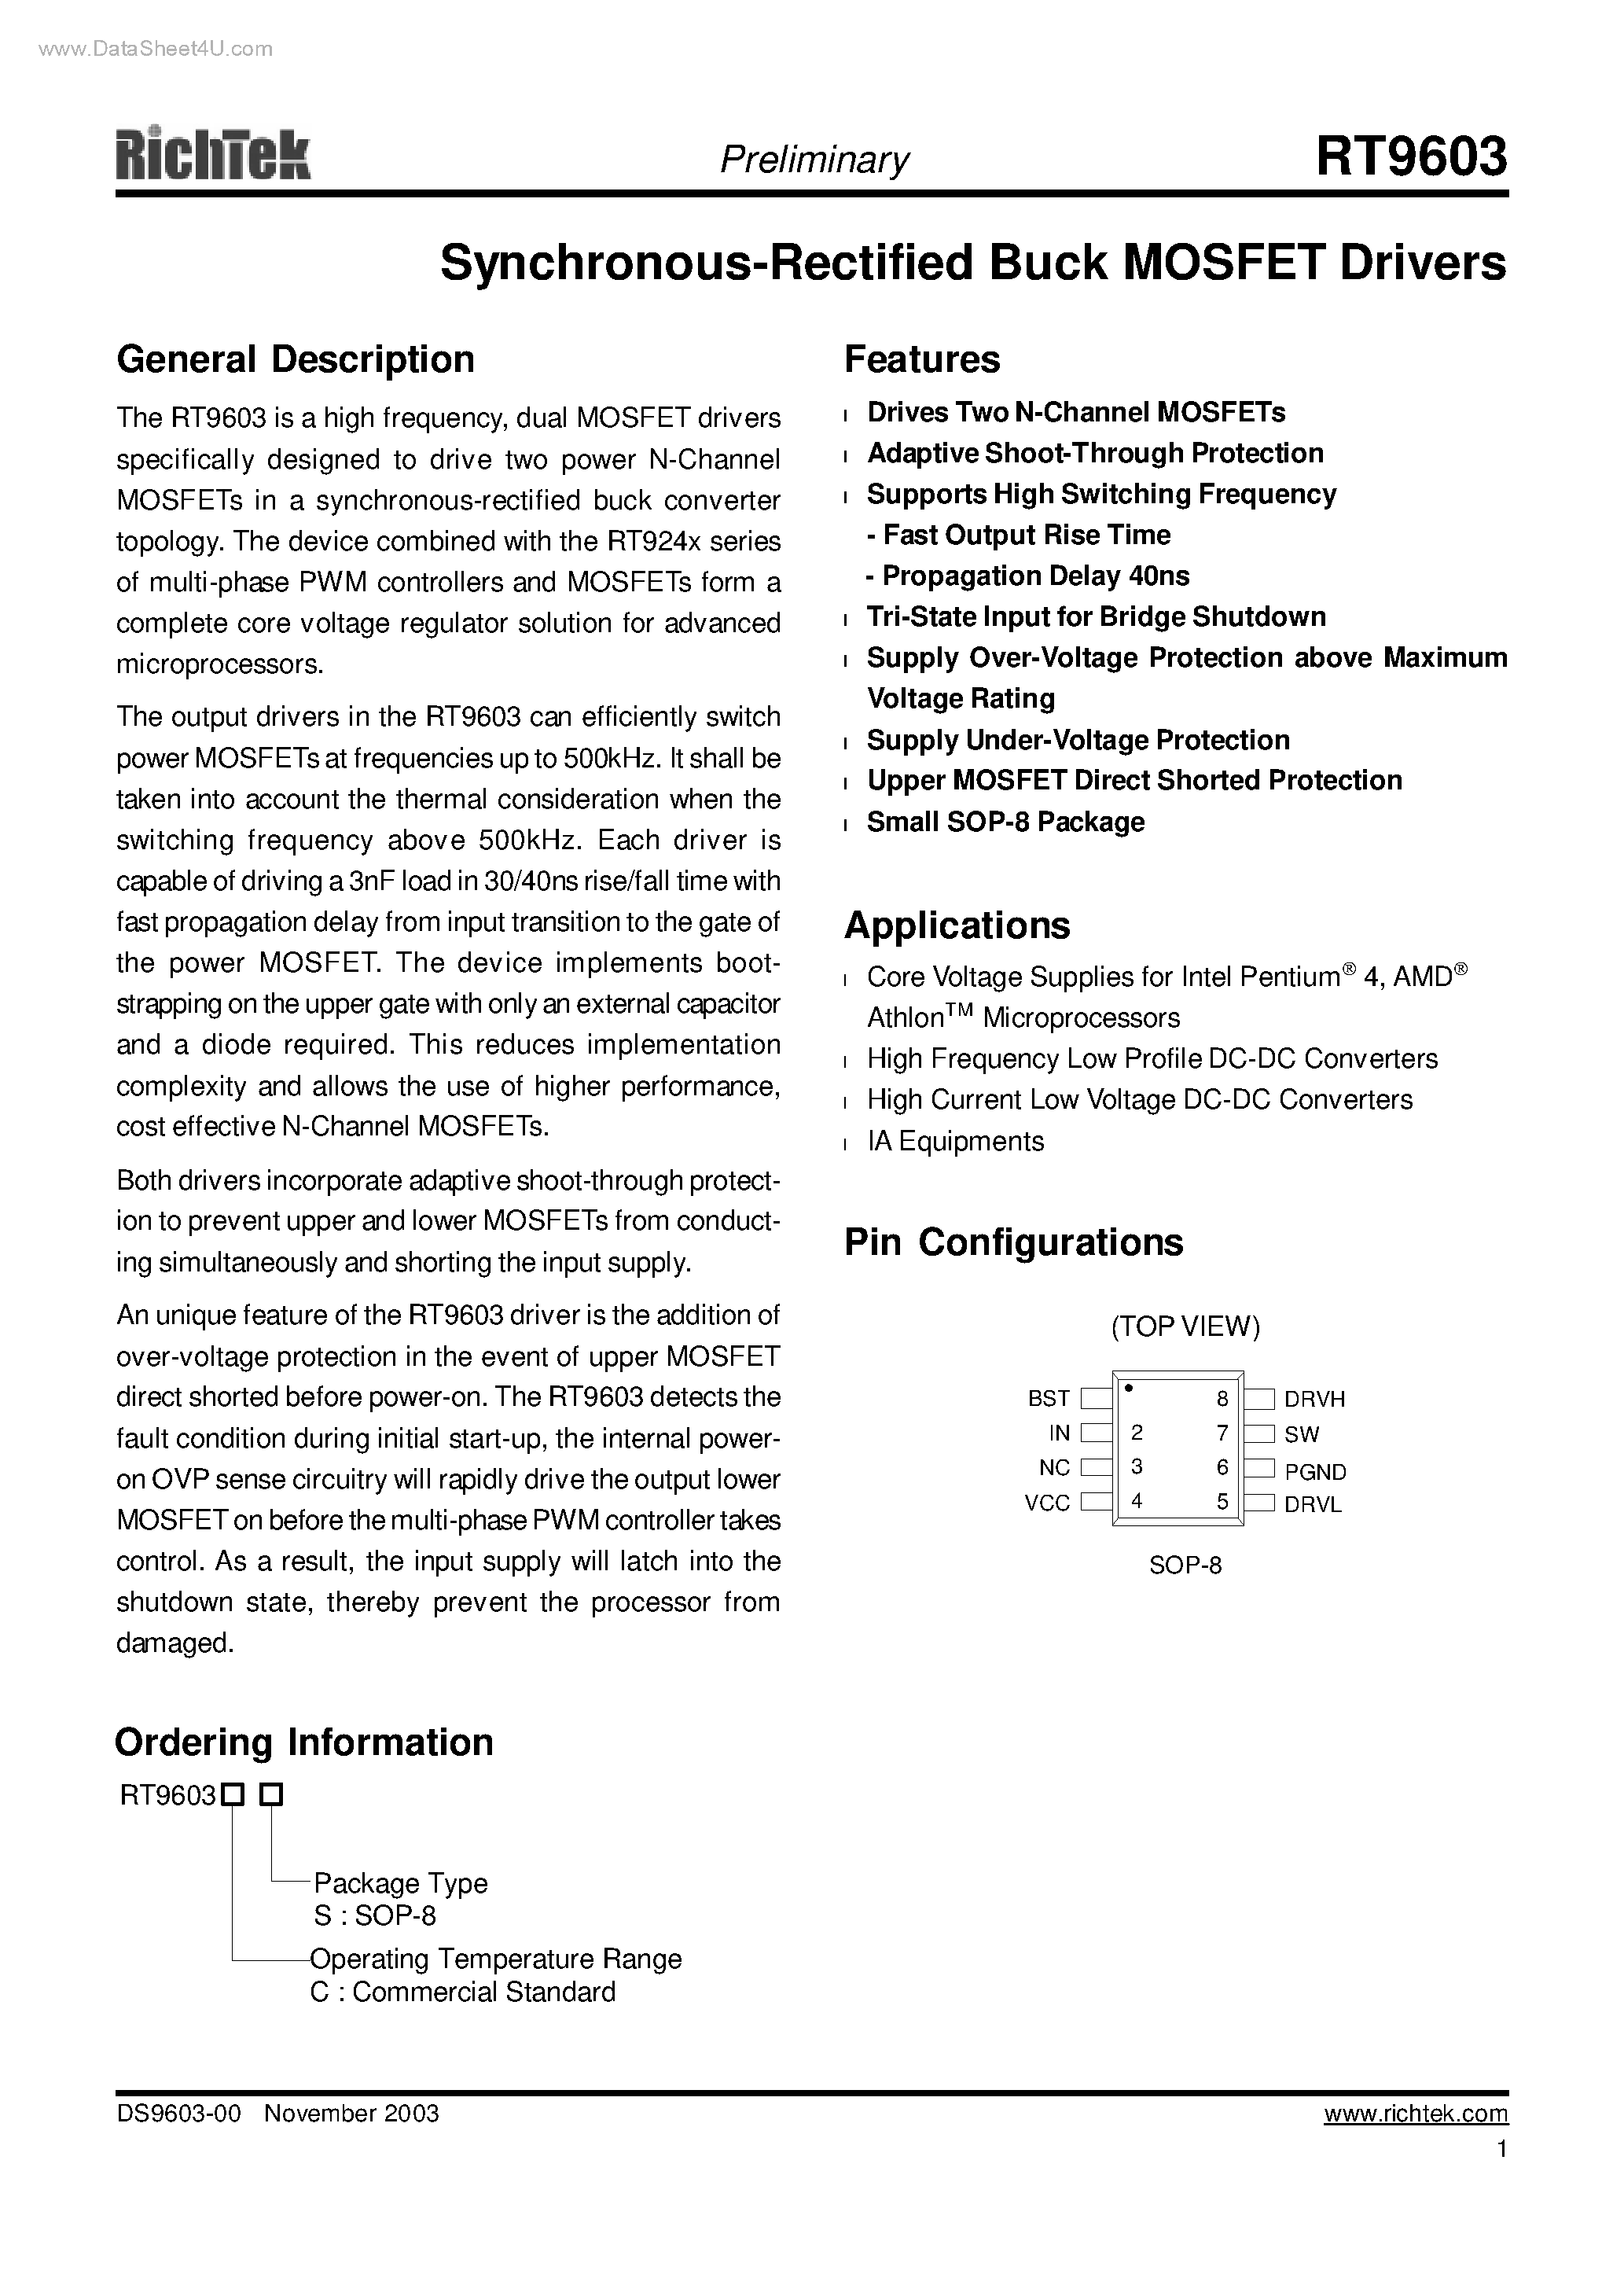 Datasheet RT9603 - Synchronous-Rectified Buck MOSFET Drivers page 1